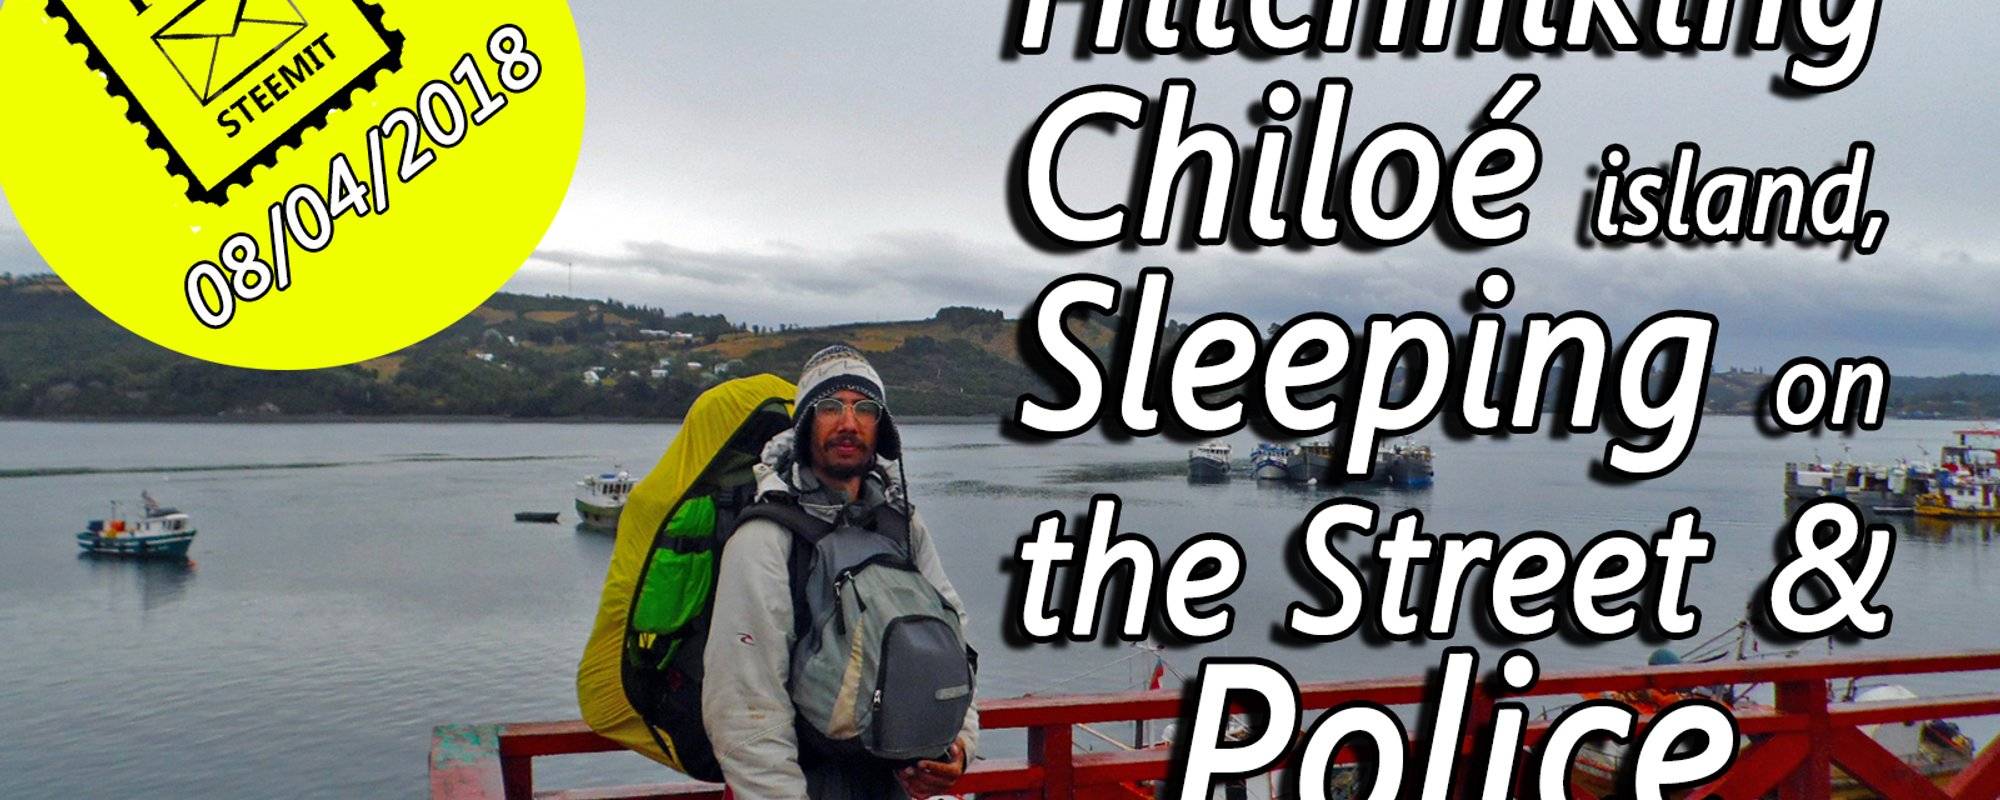 Travel Story: Hitchhiking Chiloé island in Chile (Part II)